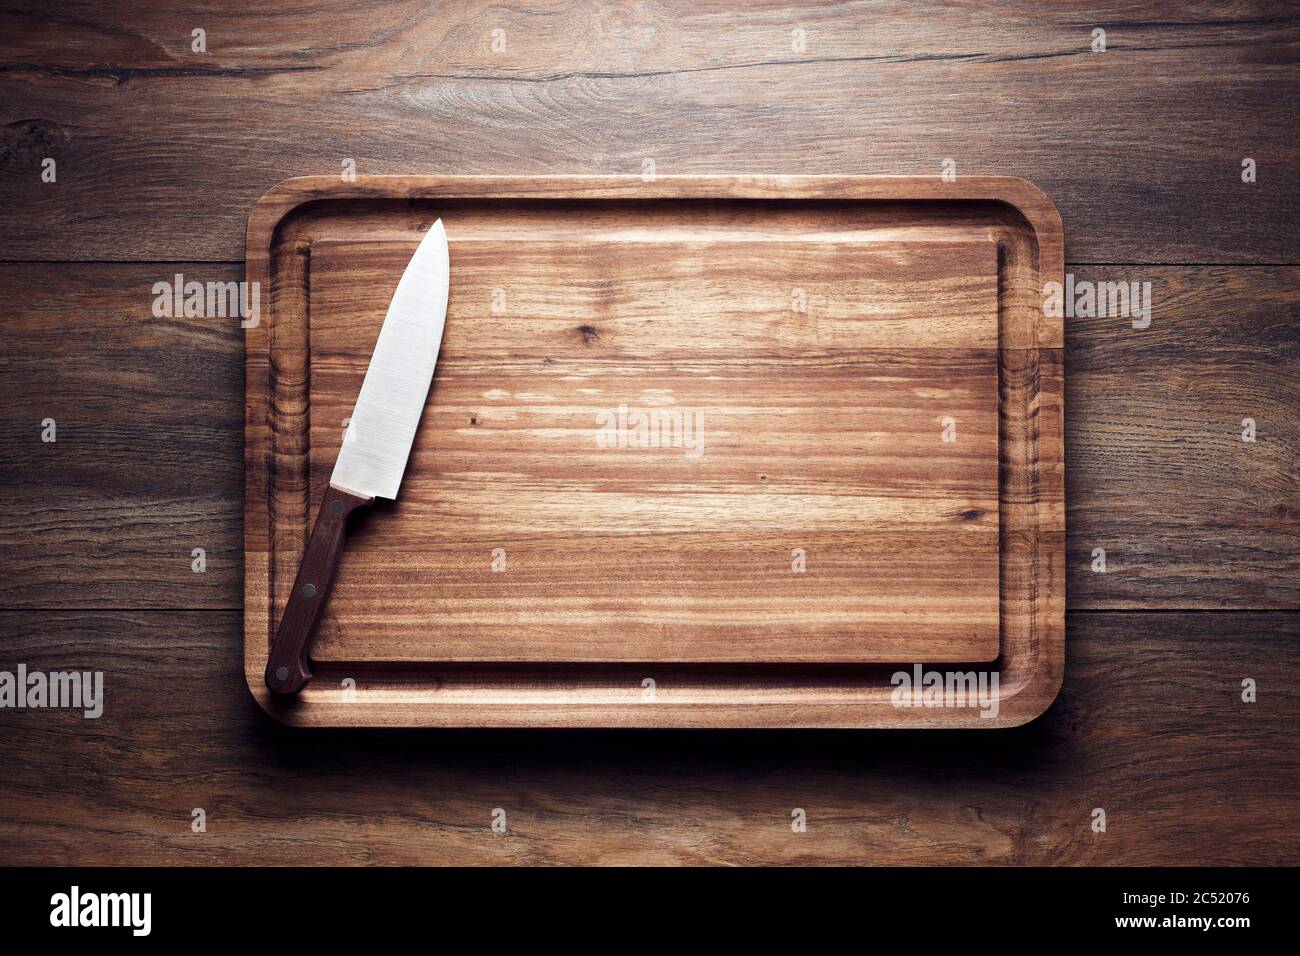 https://c8.alamy.com/comp/2C52076/empty-vintage-wooden-cutting-board-with-knife-on-wooden-table-overhead-view-with-copy-space-2C52076.jpg